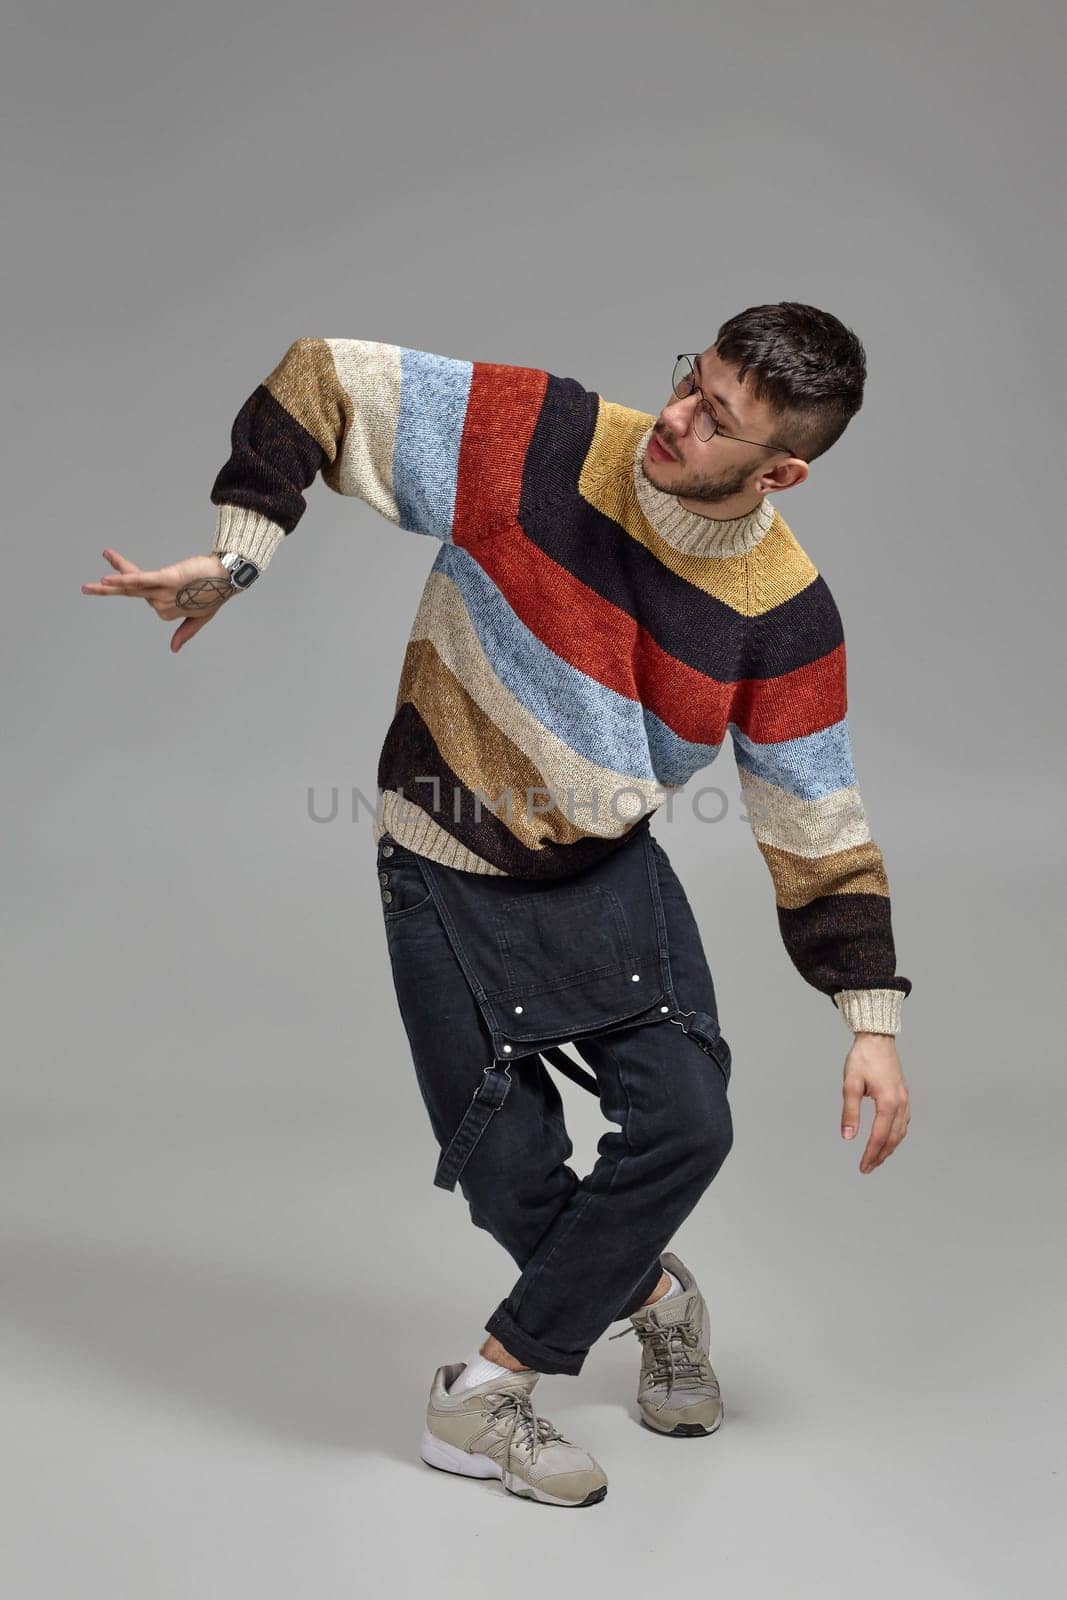 Full-length portrait of a funny dancer in glasses, black jumpsuit, multi-colored sweater and gray sneakers fooling around in studio. Indoor photo of a guy making dance elements on a gray background. Music and imagination.